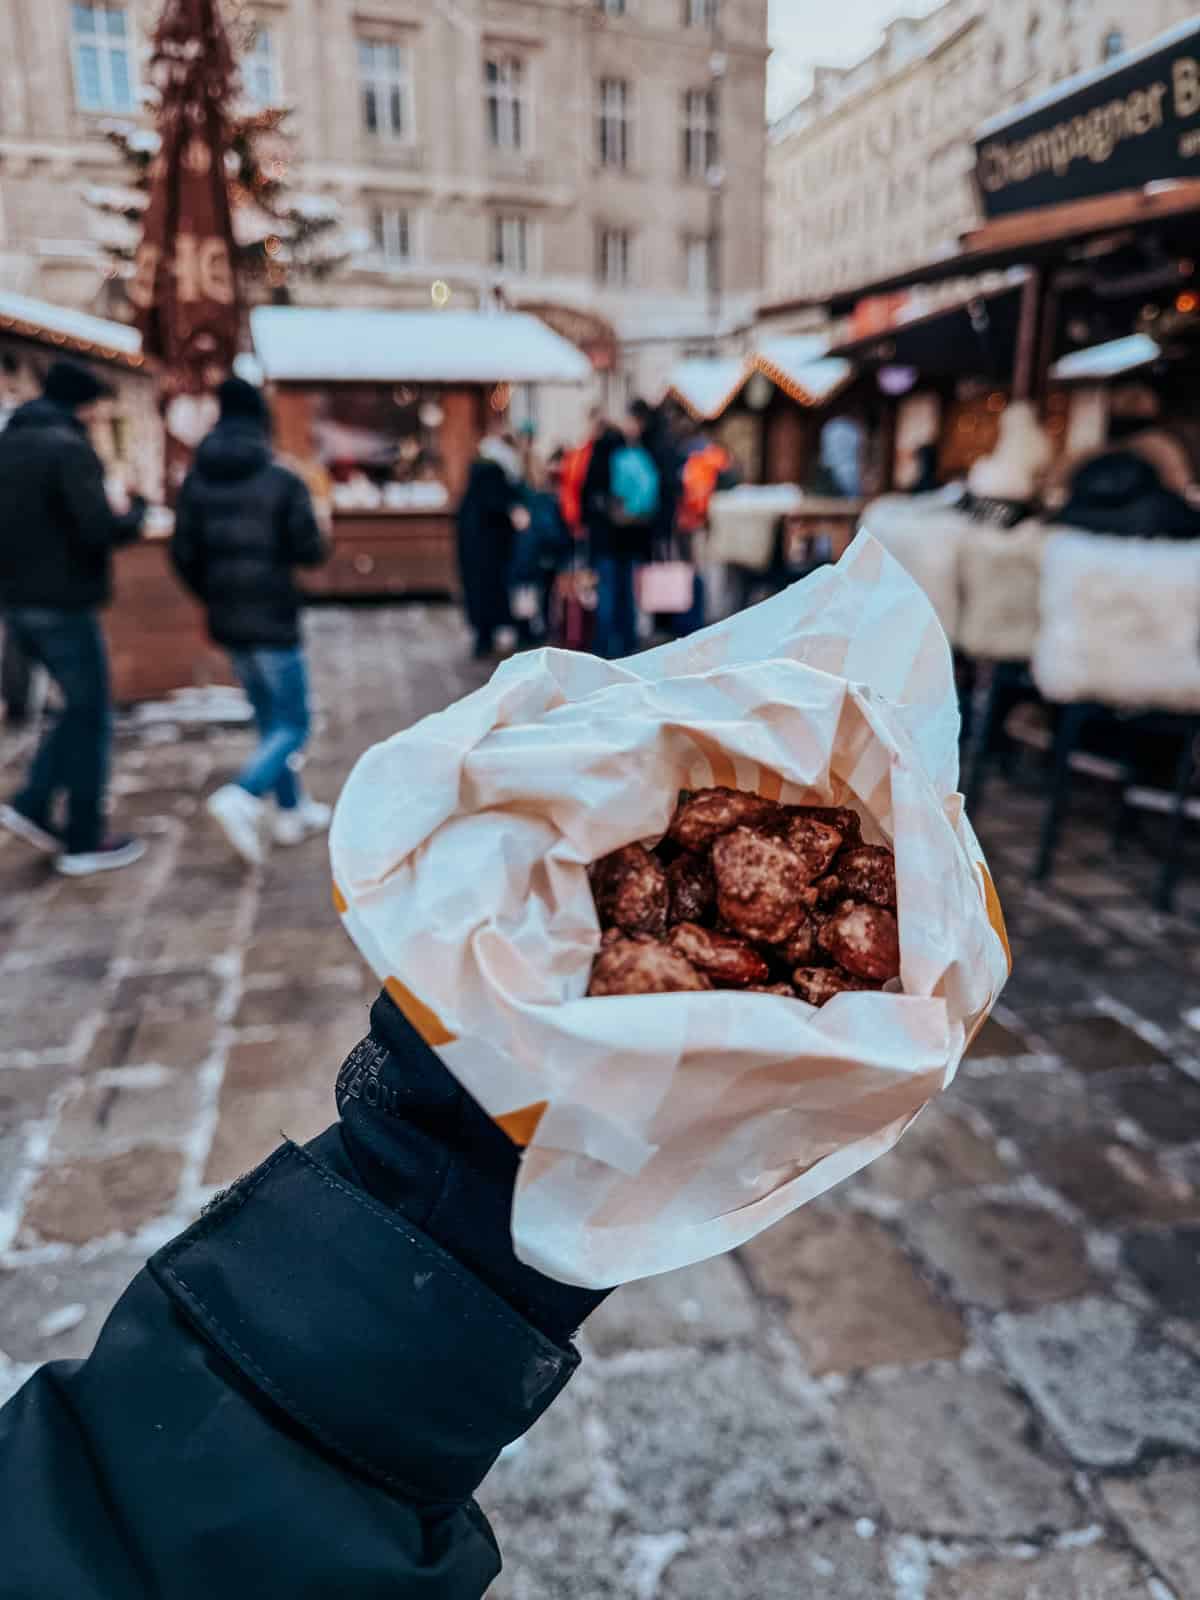 A first-person view of a paper cone filled with caramelized roasted almonds held in a gloved hand, with a blurred Christmas market scene in the background